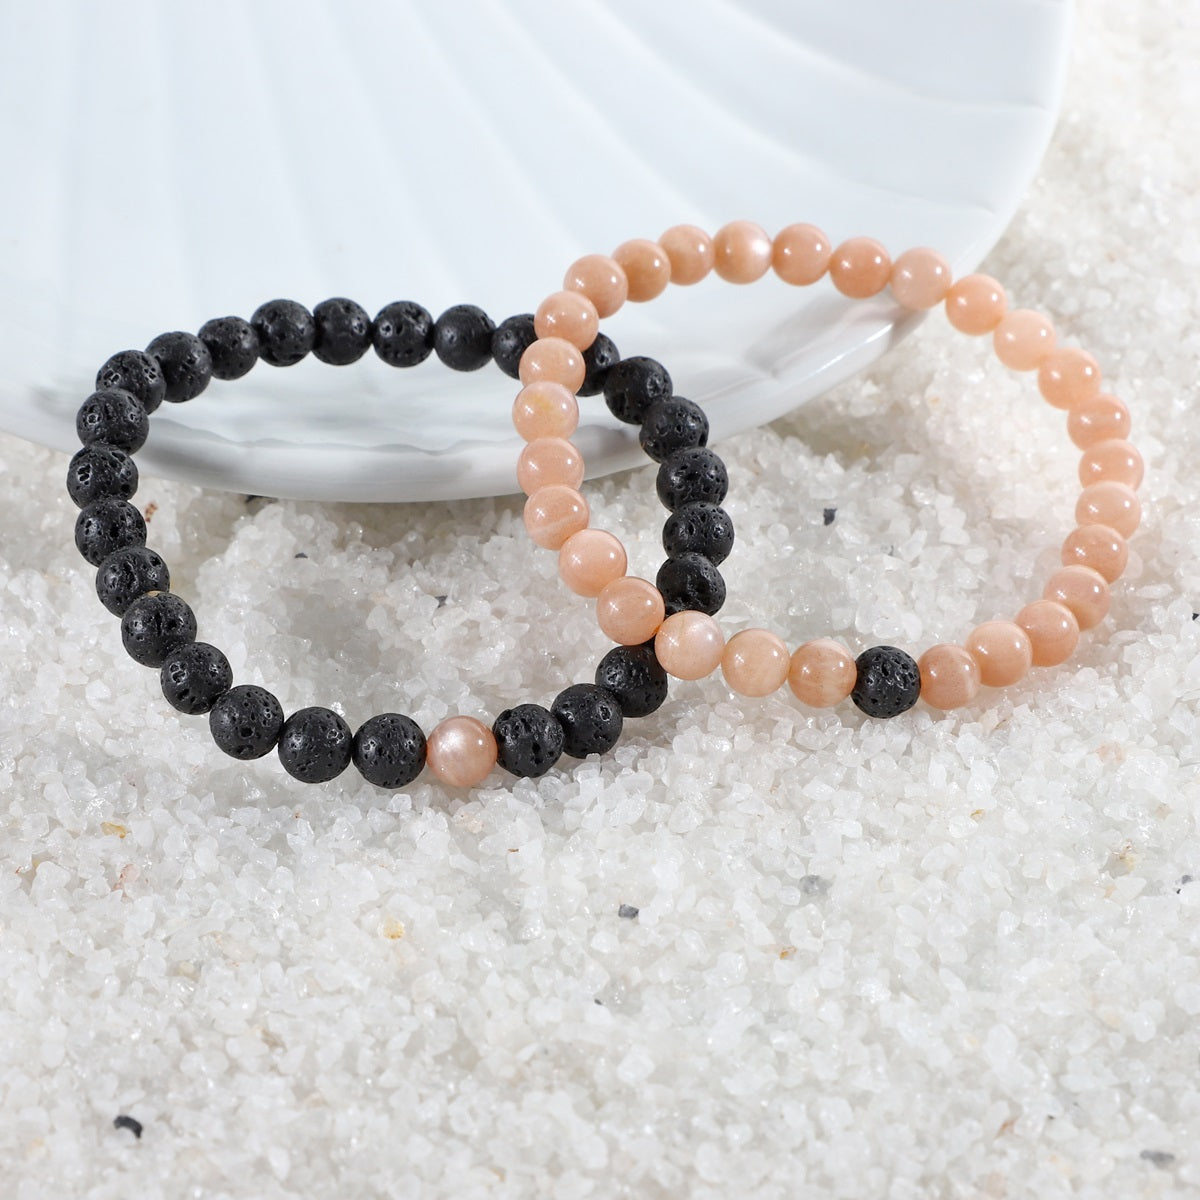 Detailed view of a 6mm Lava bead, highlighting the porous texture for aromatherapy infusion and symbolizing grounding strength in the bracelet combo.